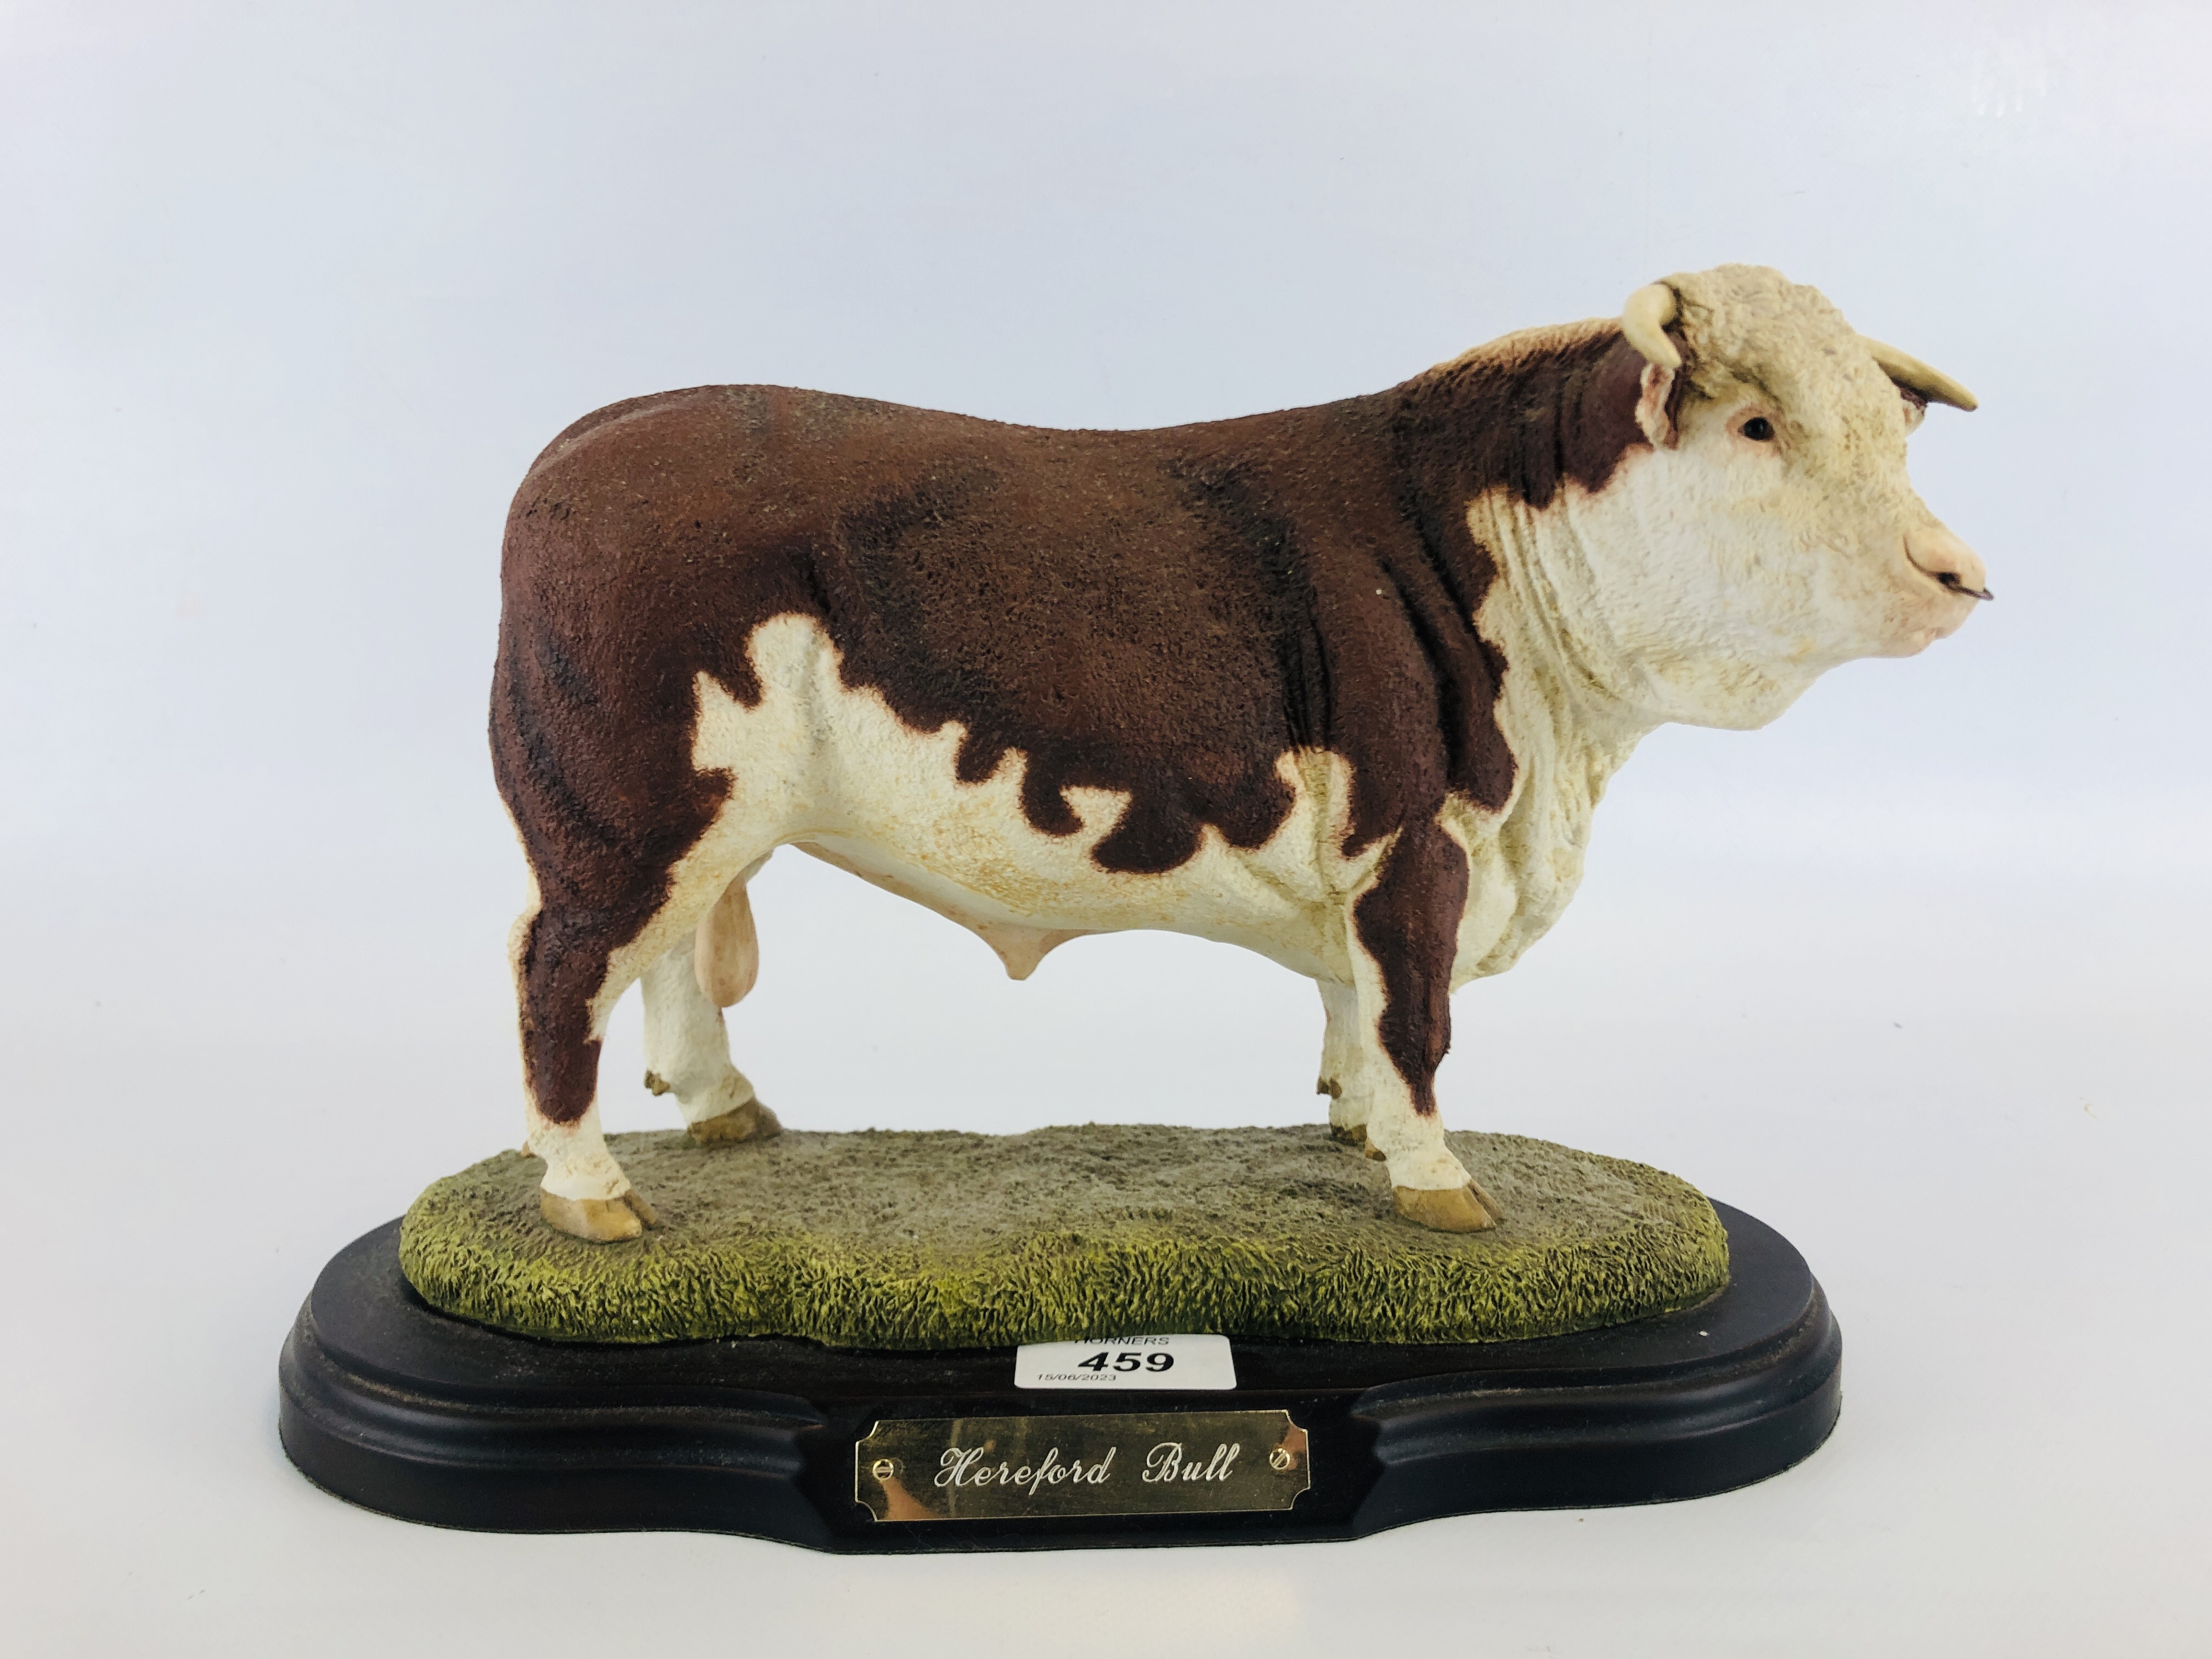 "BEST OF BREED" BY NATURECRAFT HAND PAINTED STUDY OF "HEREFORD BULL" L 30CM X H 22CM.